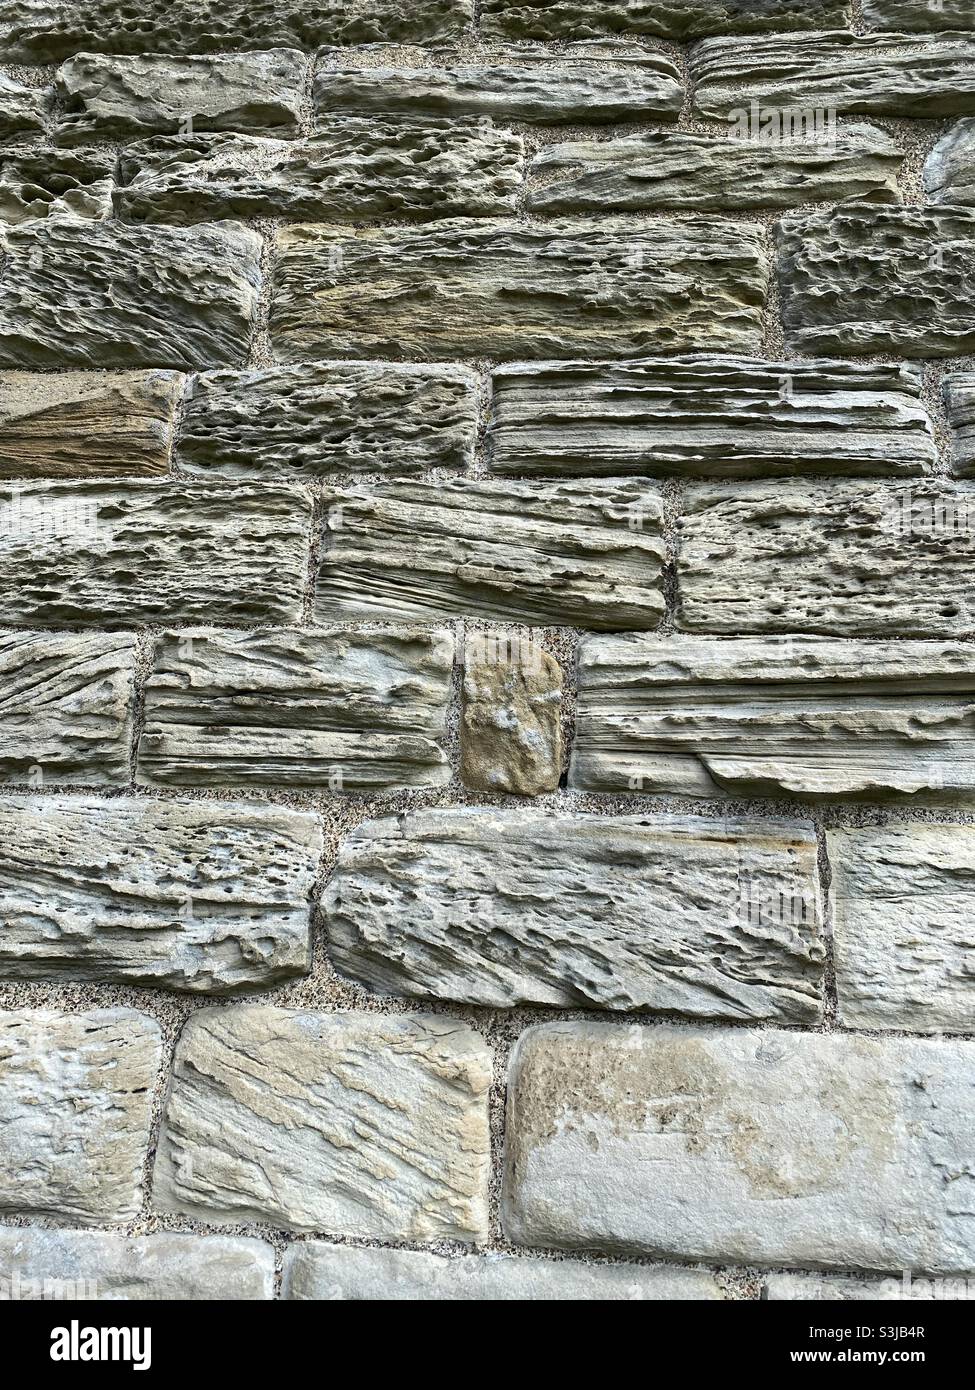 Crossbedded sandstone wall Stock Photo